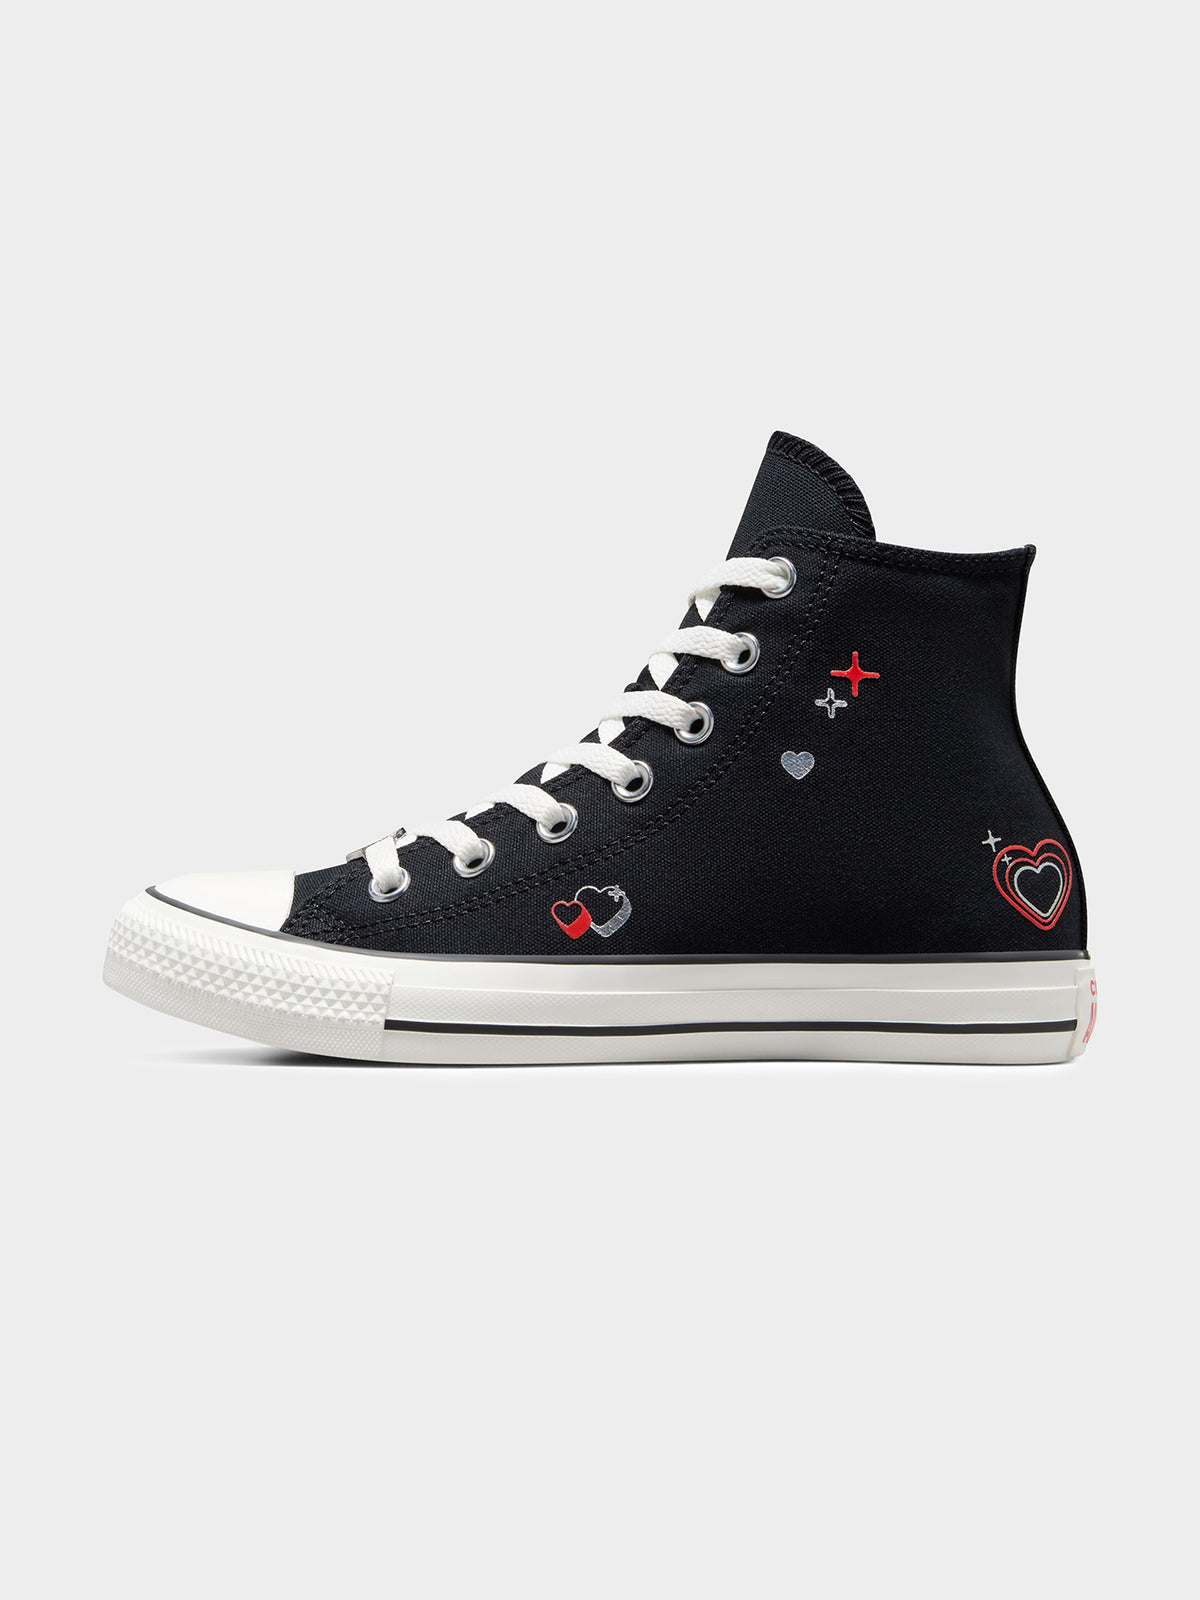 Womens Chuck Taylor All Star Y2K Heart High Top Sneakers in Black